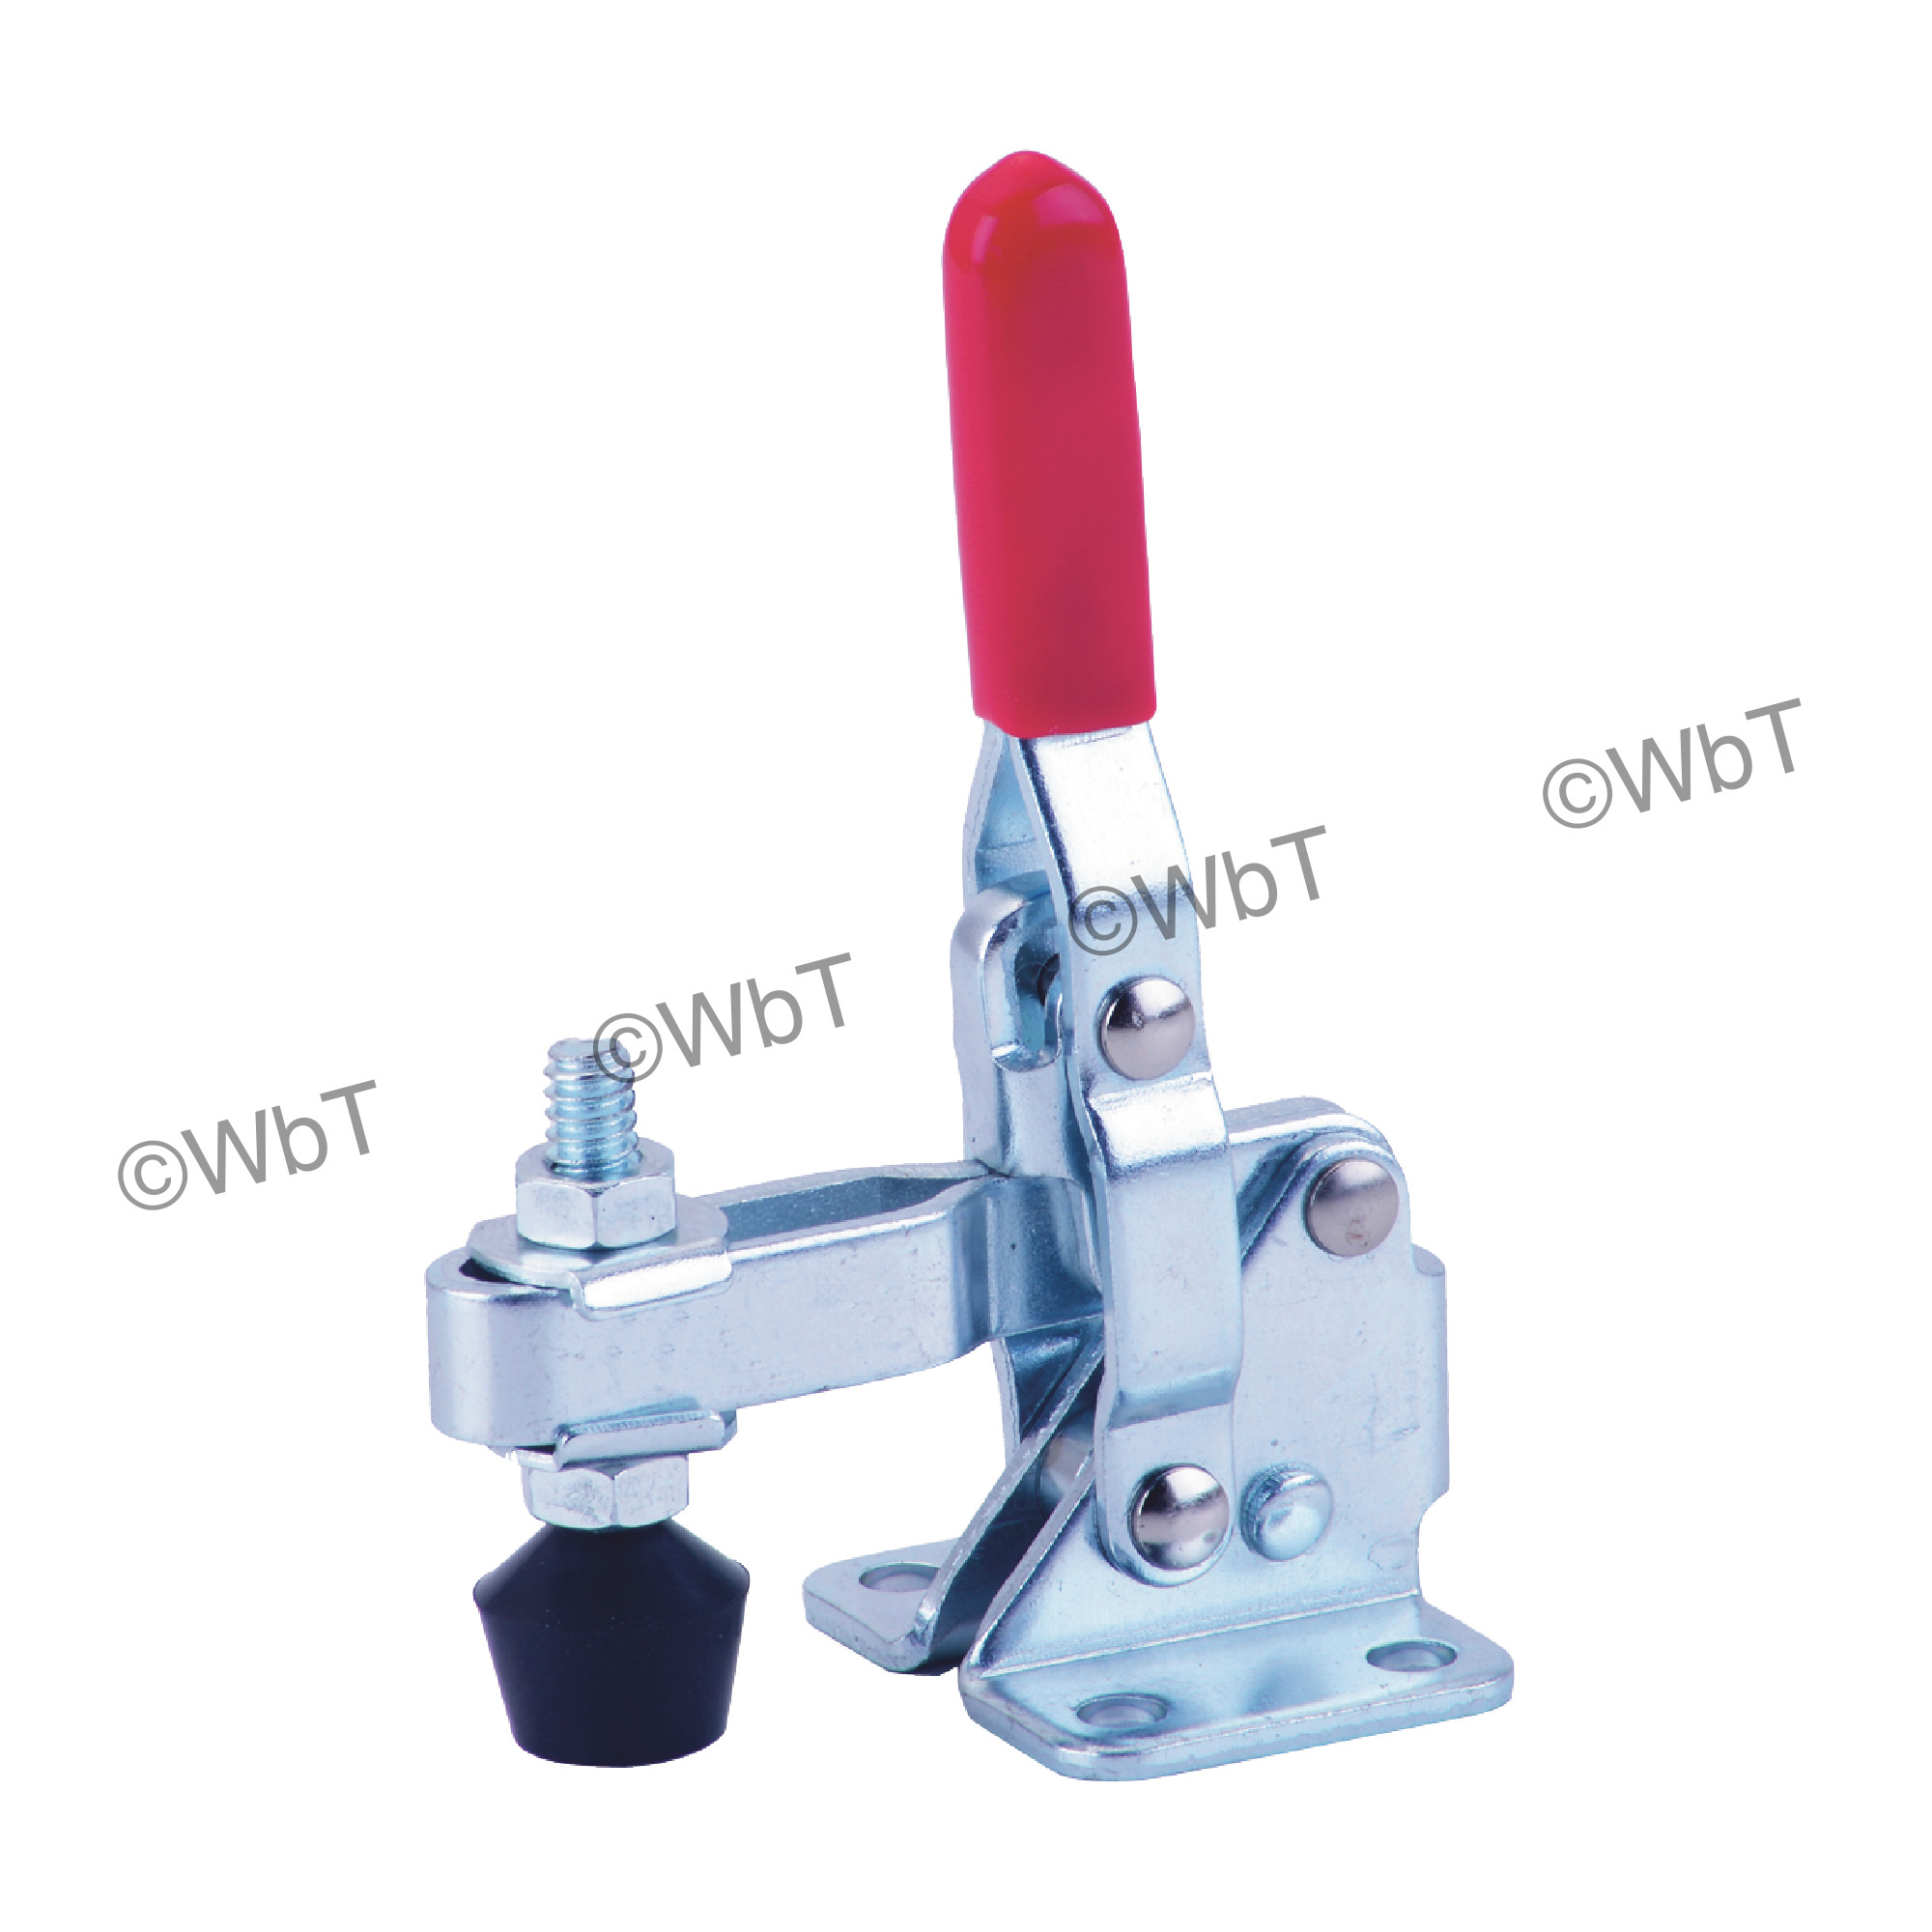 Vertical Hold Down Action Toggle Clamp